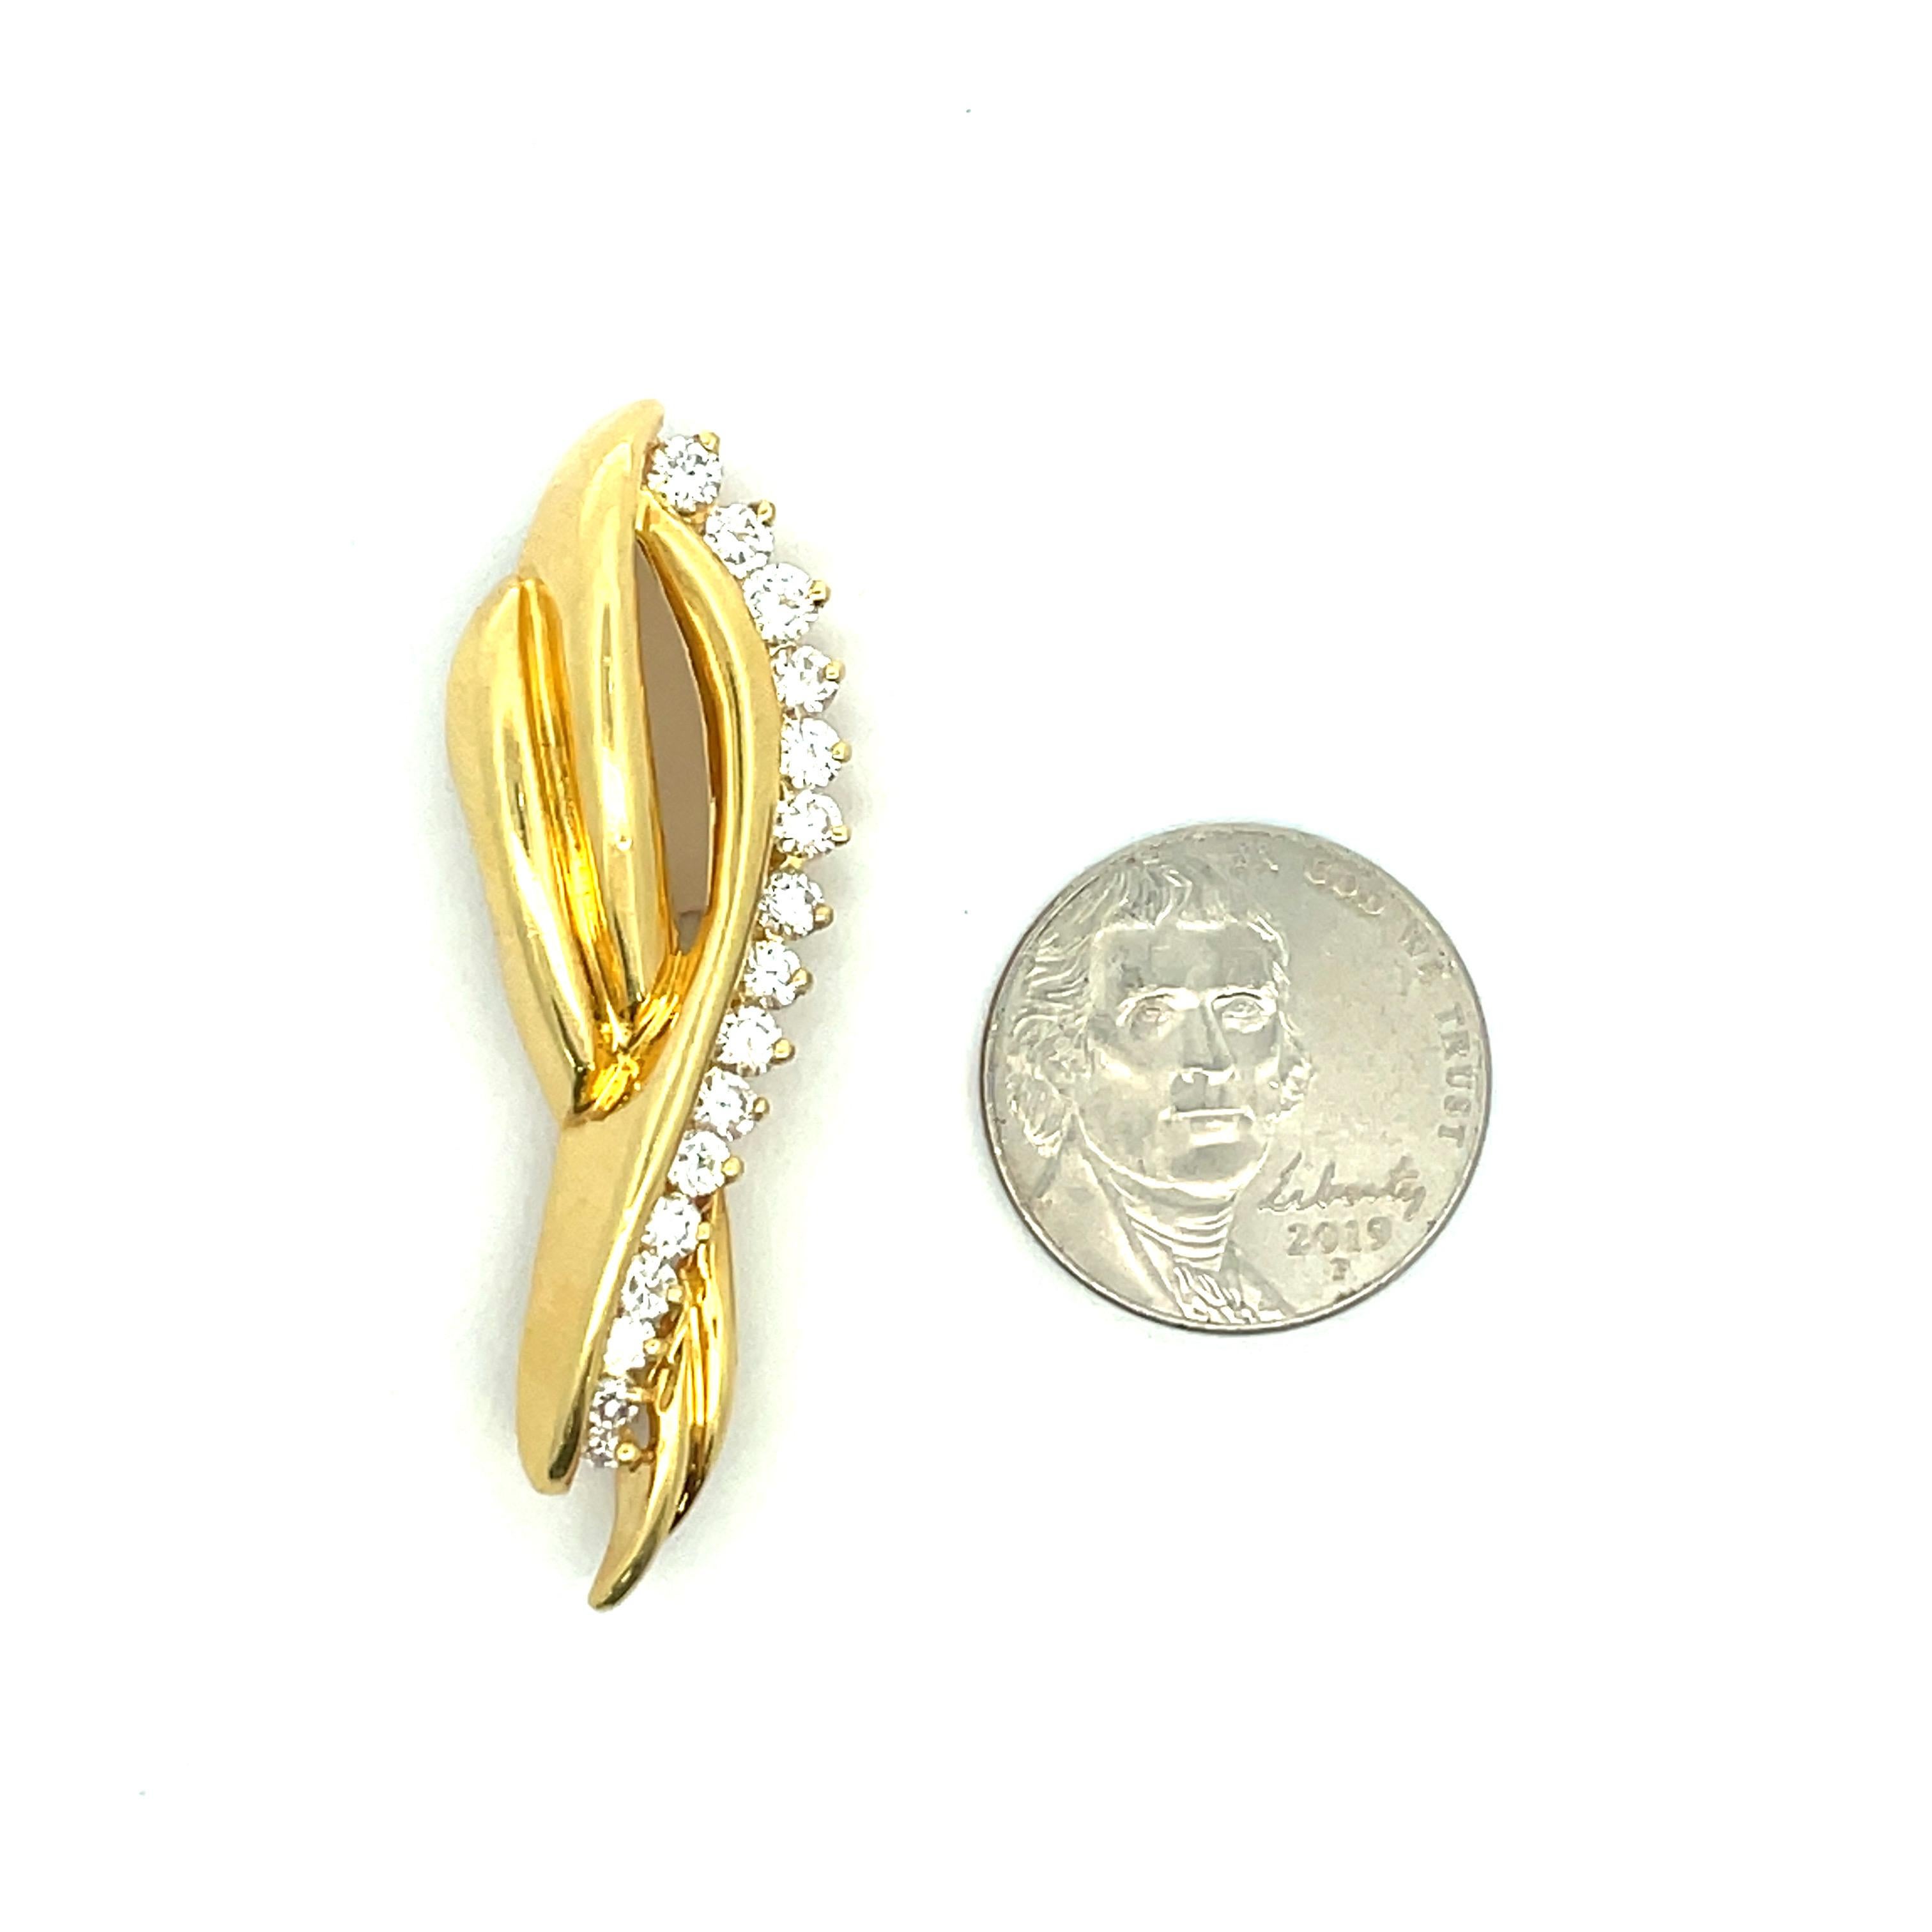 One Vintage 'Ribbon' motif brooch containing 16 round brilliants weighing approximately 1 Carat in 18 Karat yellow gold. 